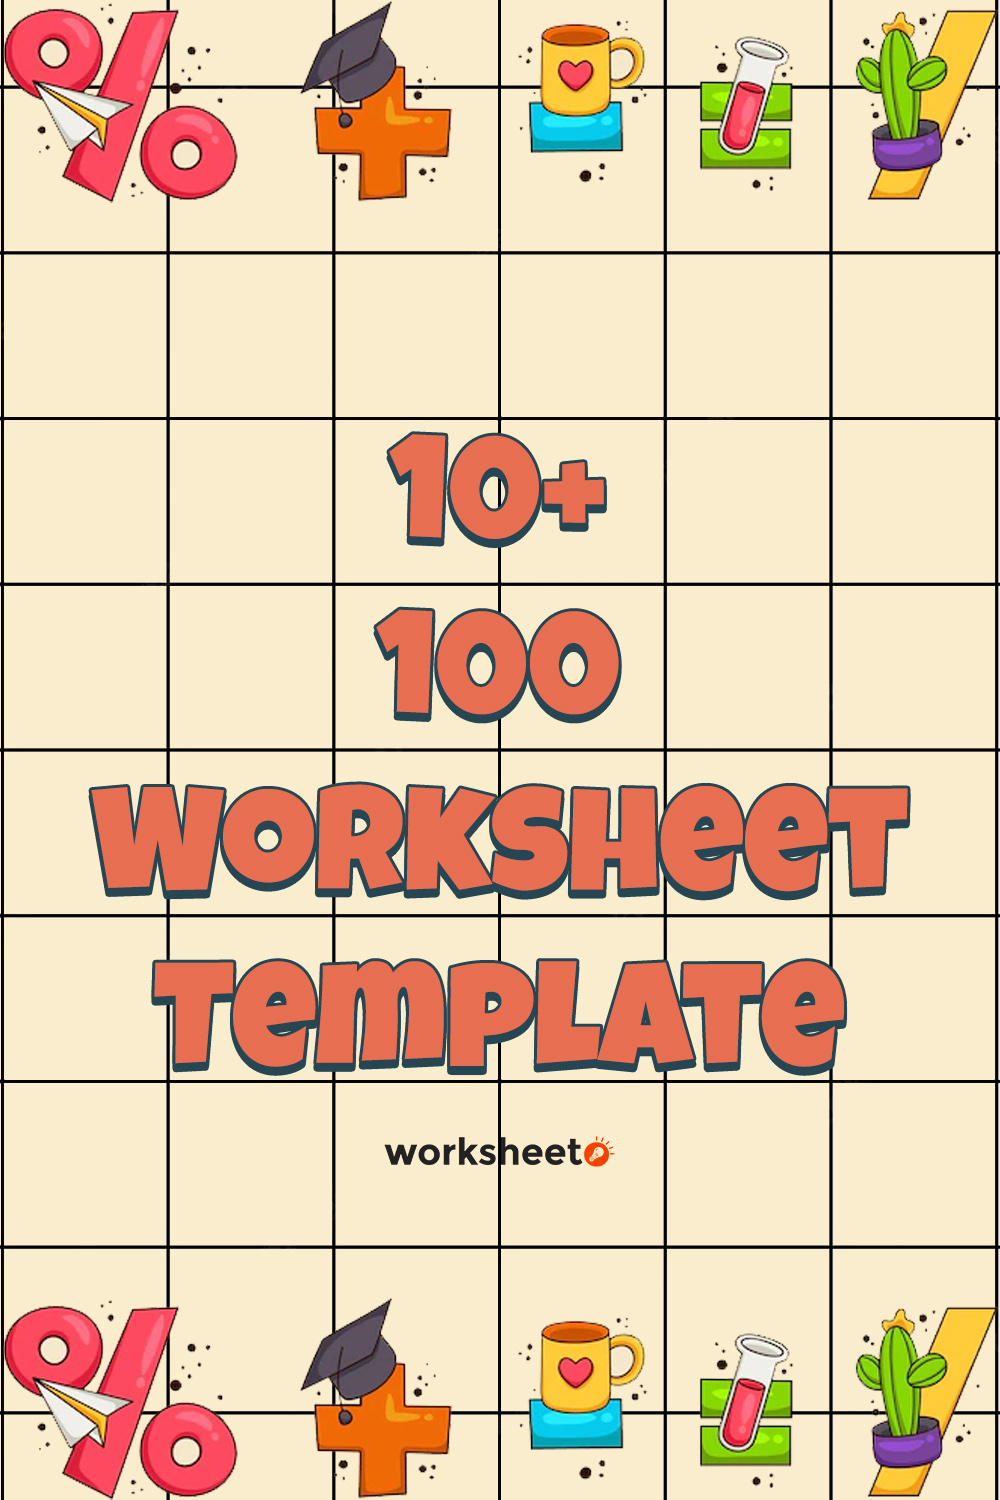 15 Images of 100 Worksheet Template